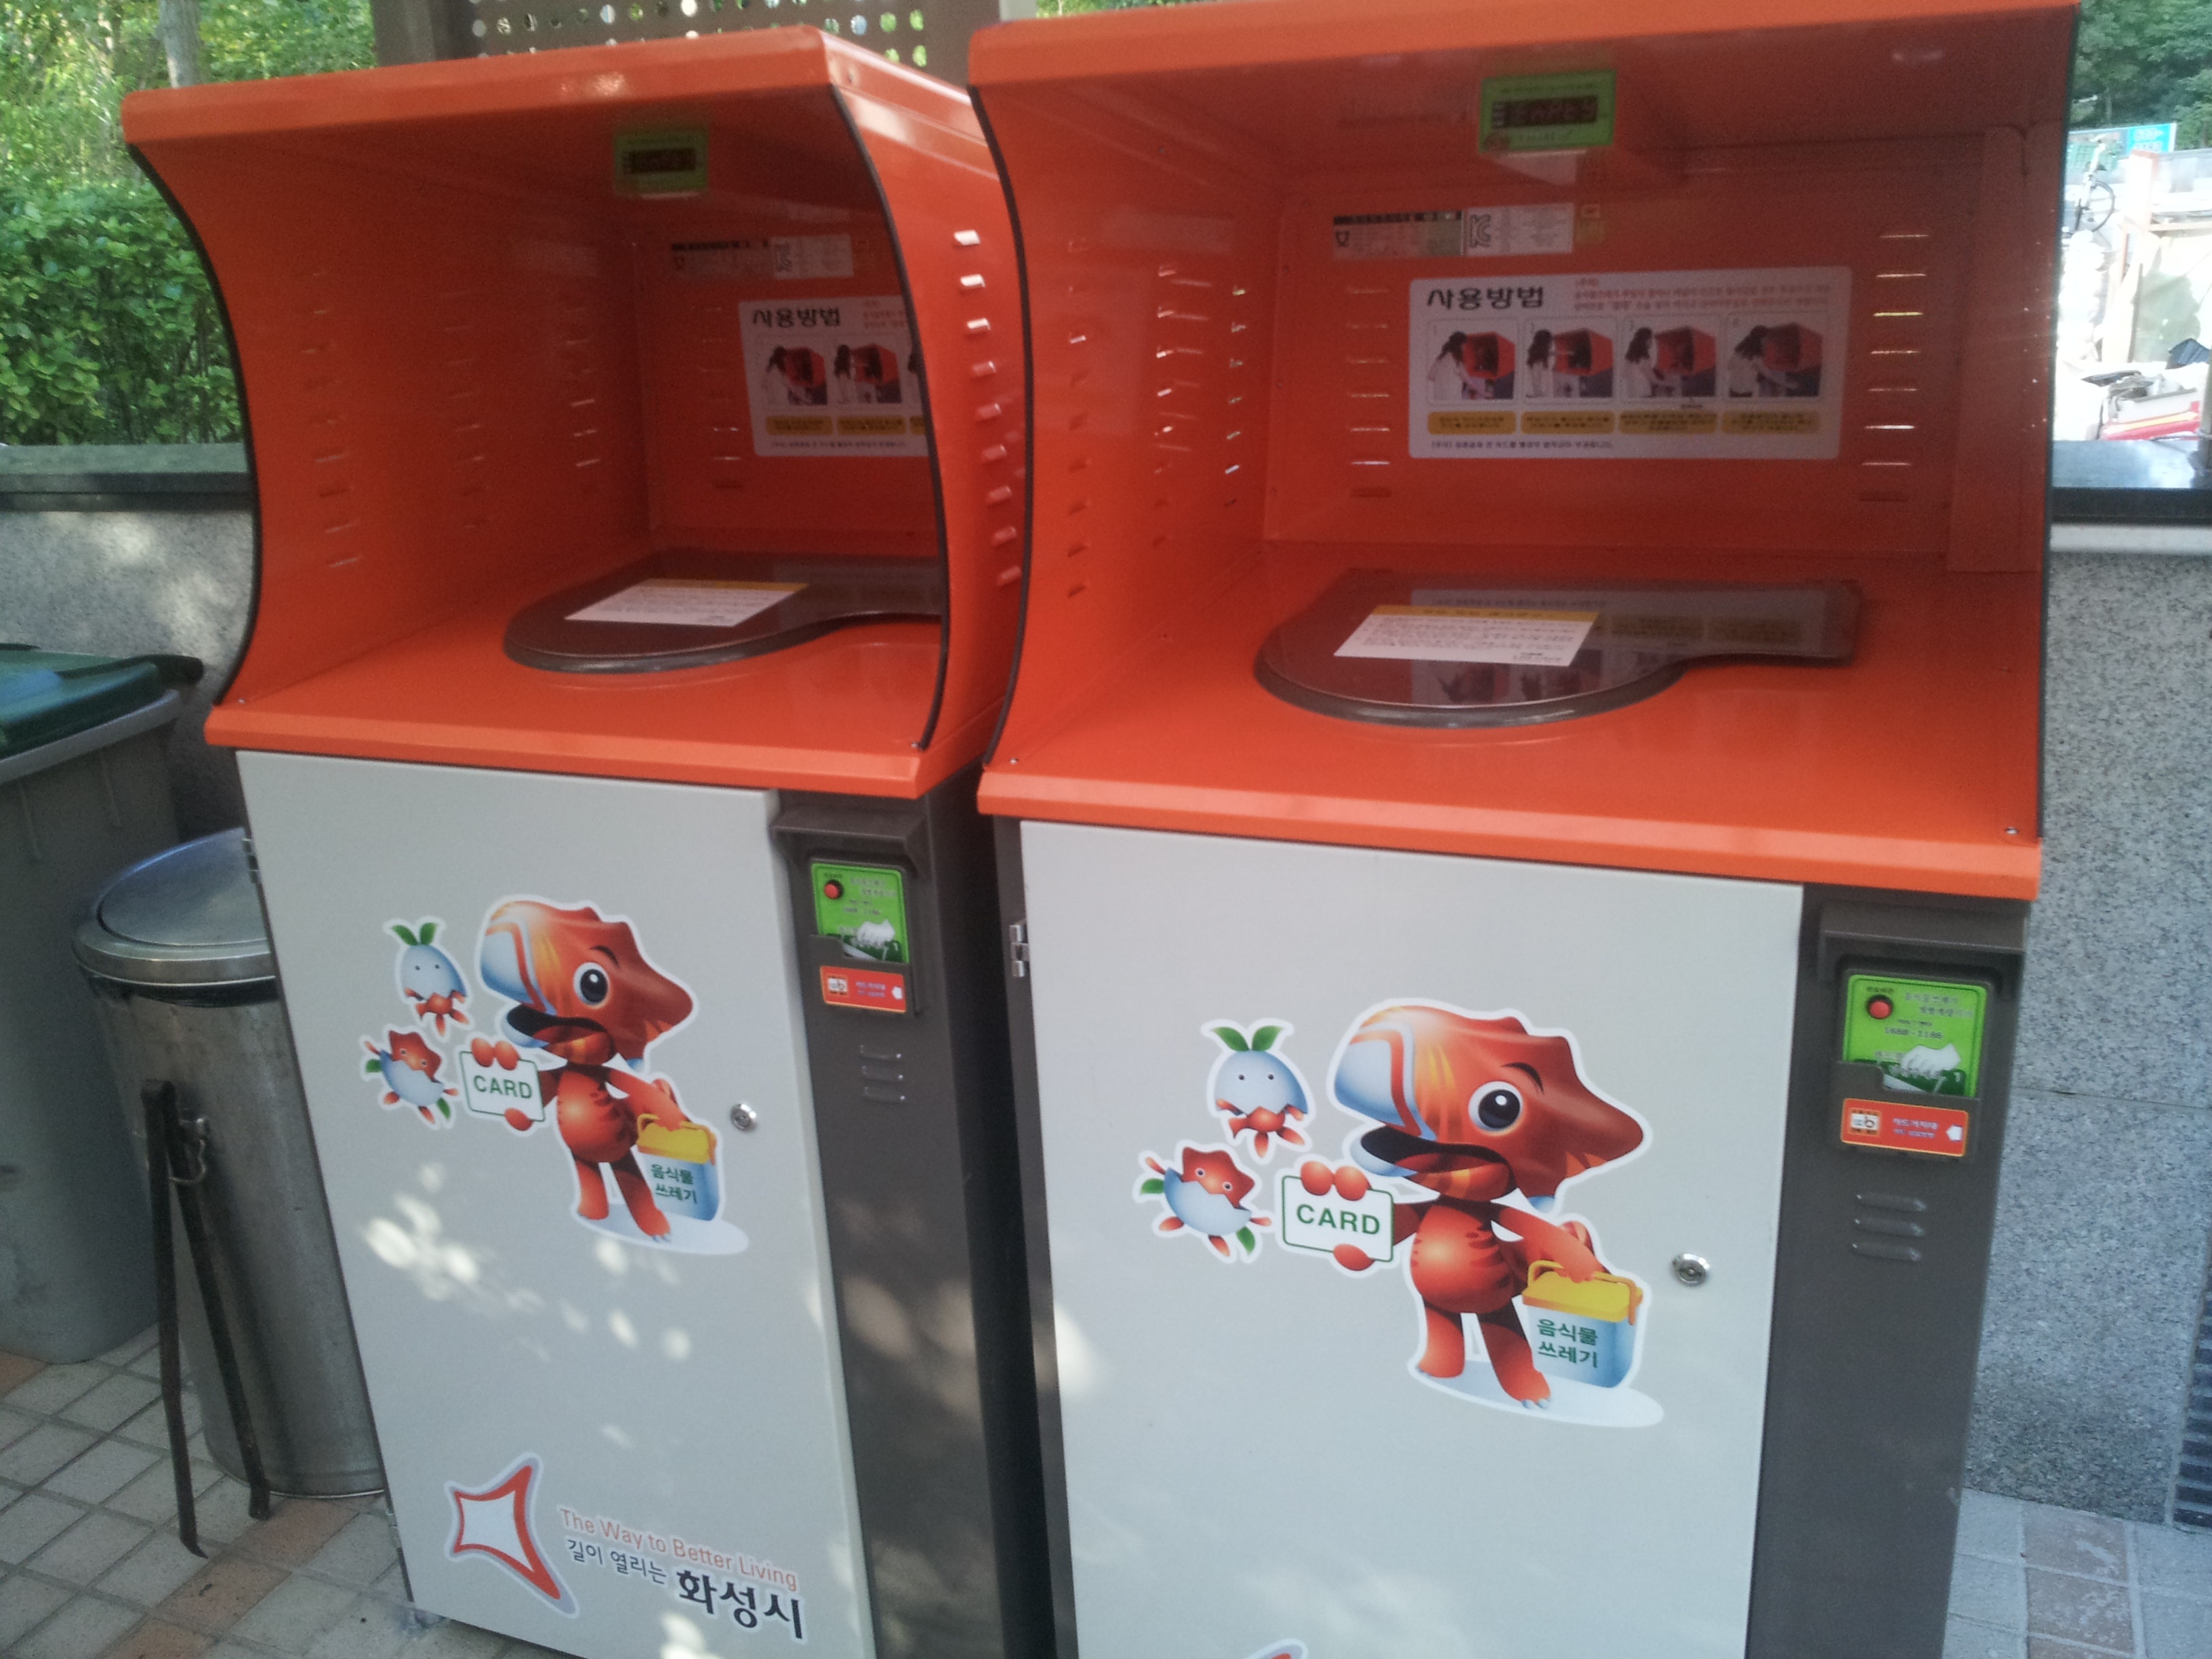 Two bins marked with cartoons and colorful graphics showing what they collect